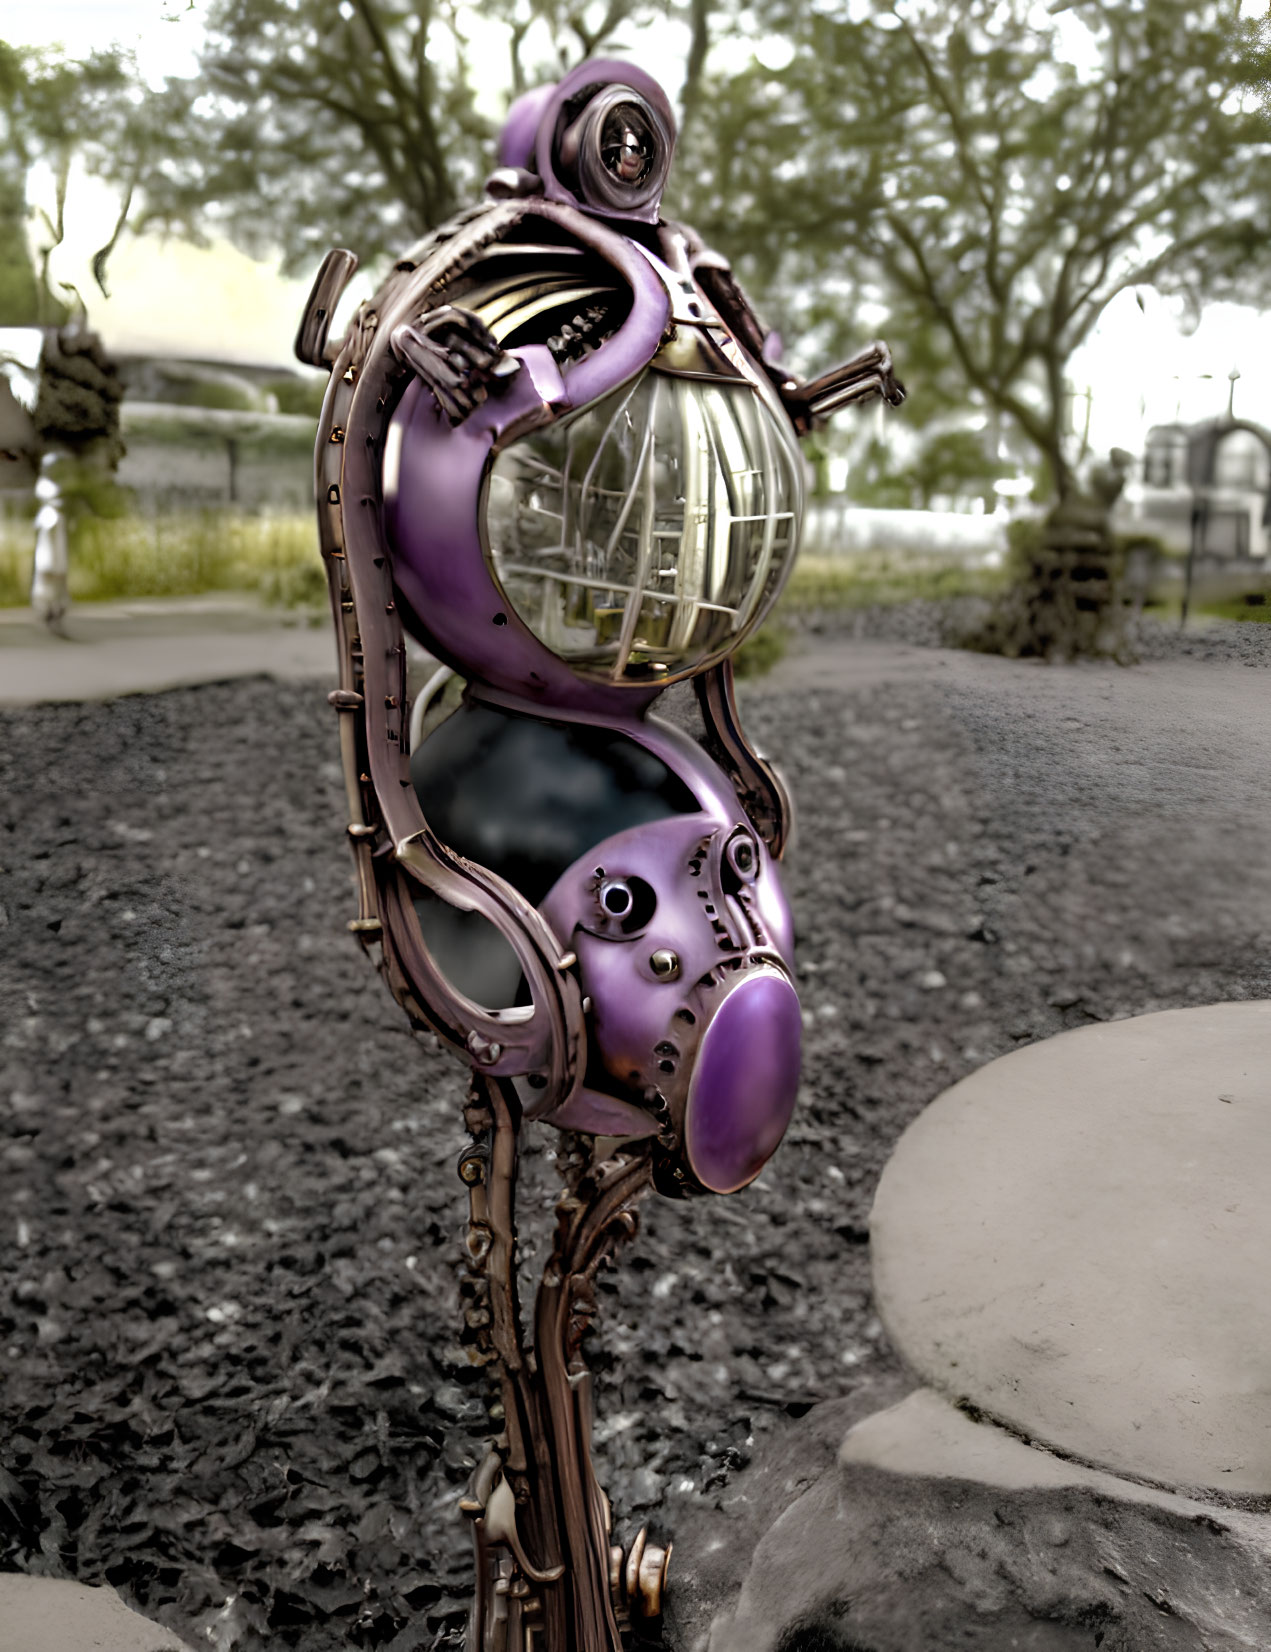 Steampunk-style humanoid seahorse sculpture with brass and purple finishes, cogs, and glass